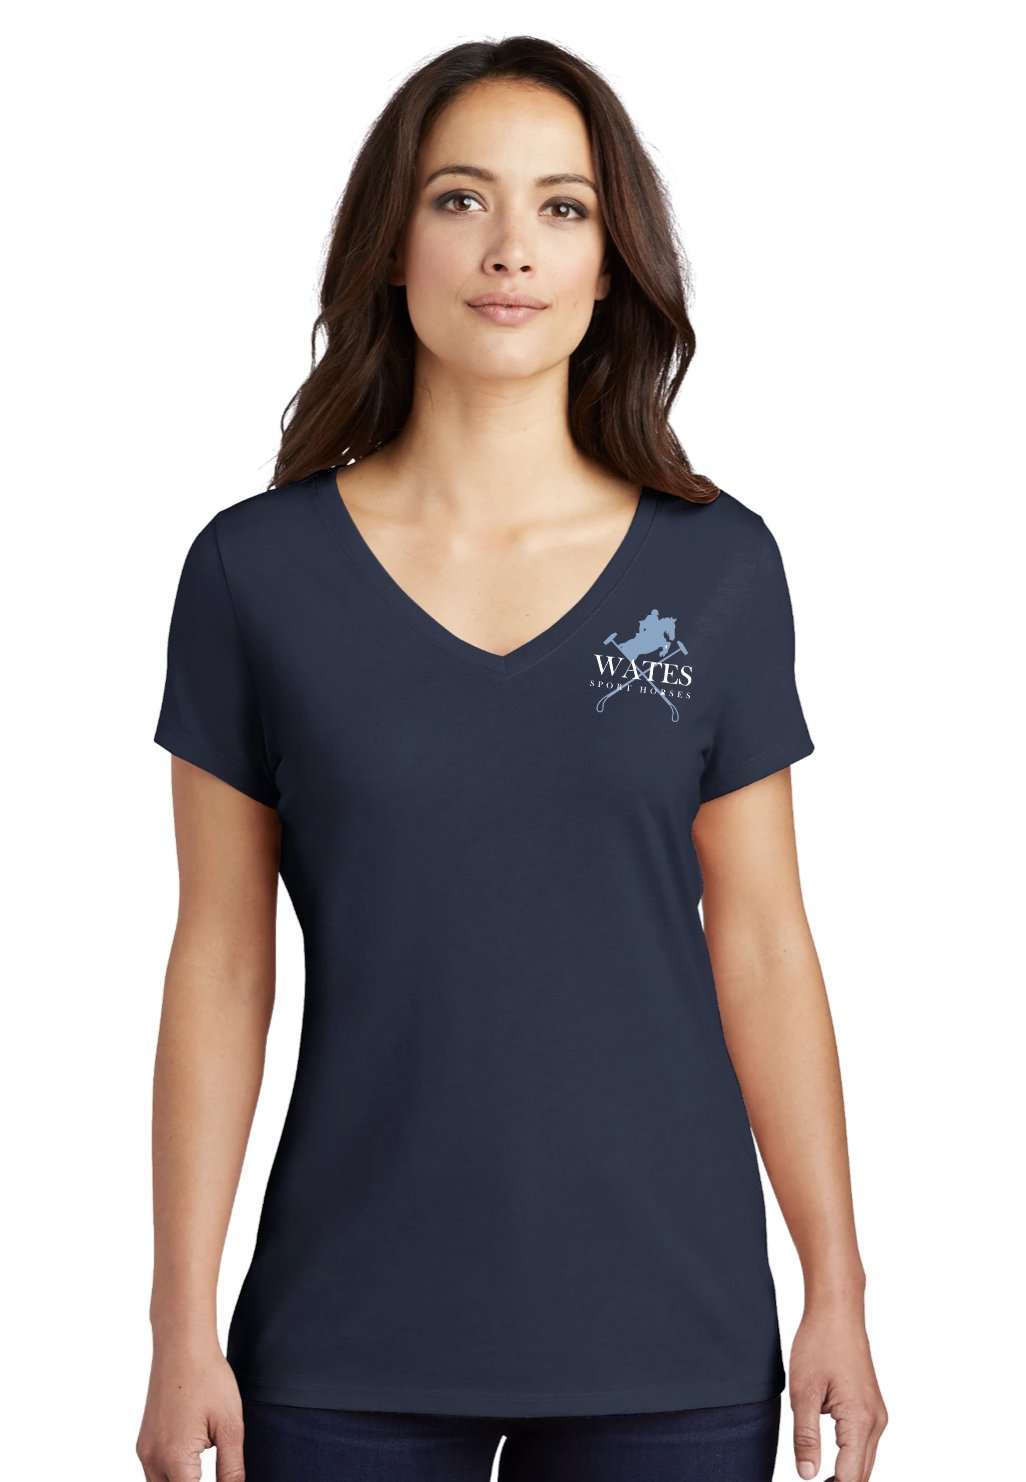 Wates Sport Horses District ® Women’s Perfect Tri ® V-Neck Tee - Navy or Grey